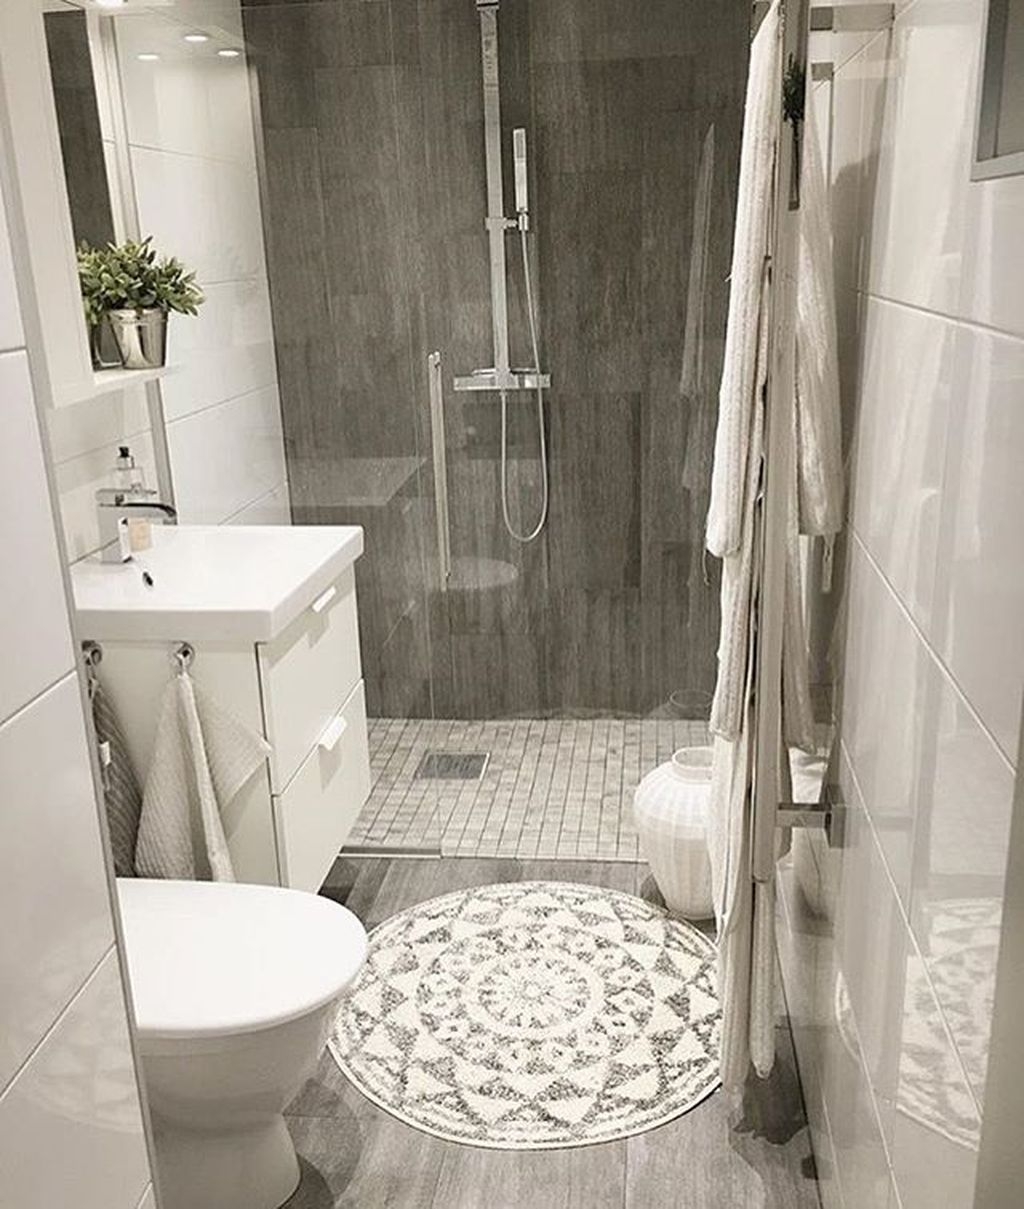 bathroom layout guidelines and requirements